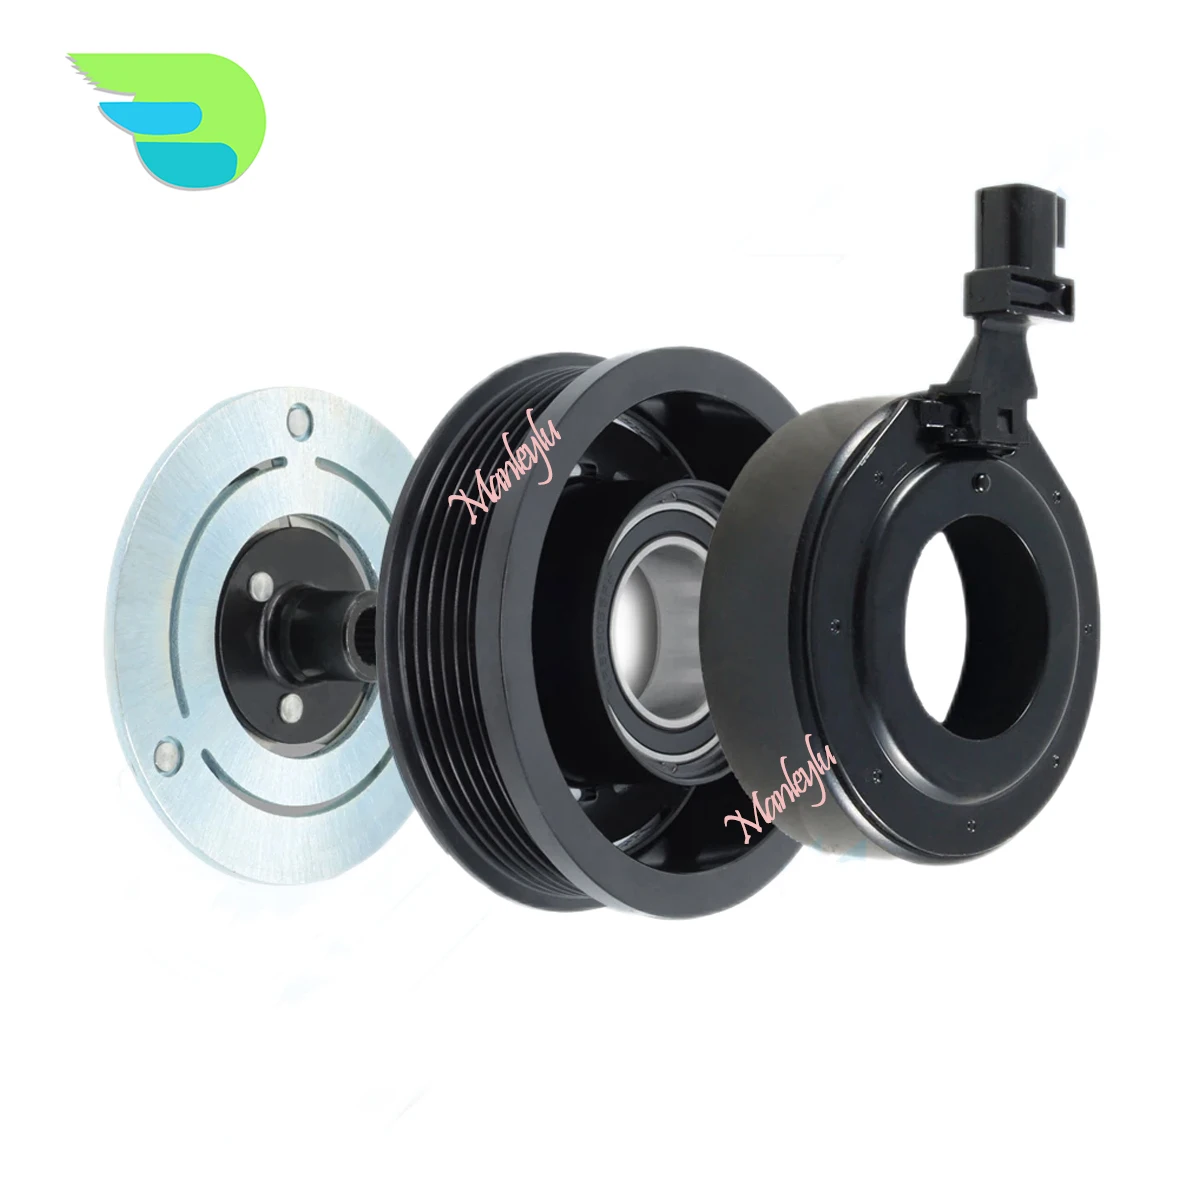 

AC Compressor Clutch Pulley FOR FORD FOCUS MK3 MONDEO MK4 1.6 2.0 ECOBOOST 1706375 1707371 1682592 1683959